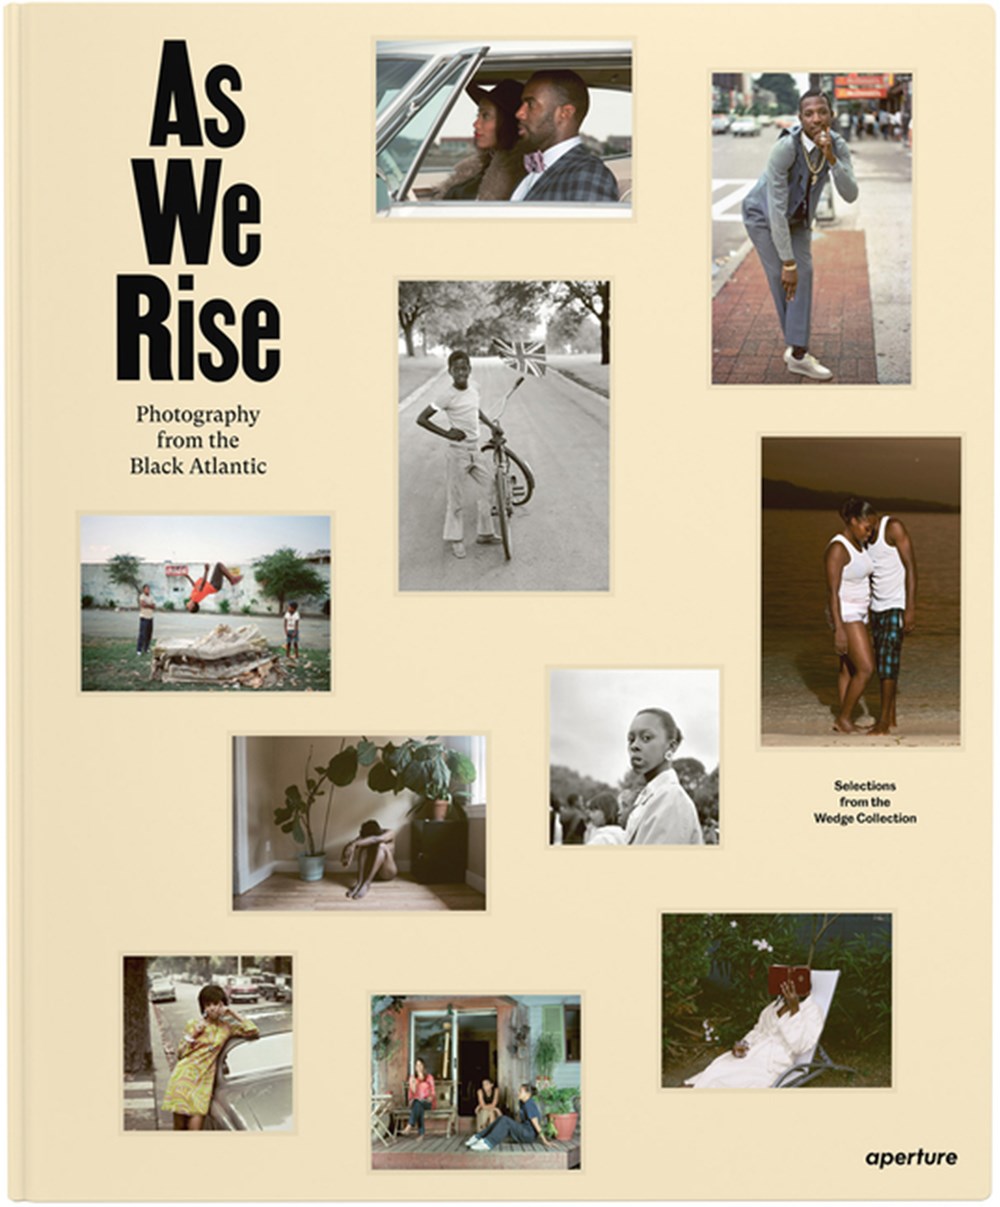 As We Rise Photography from the Black Atlantic: Selections from the Wedge Collection